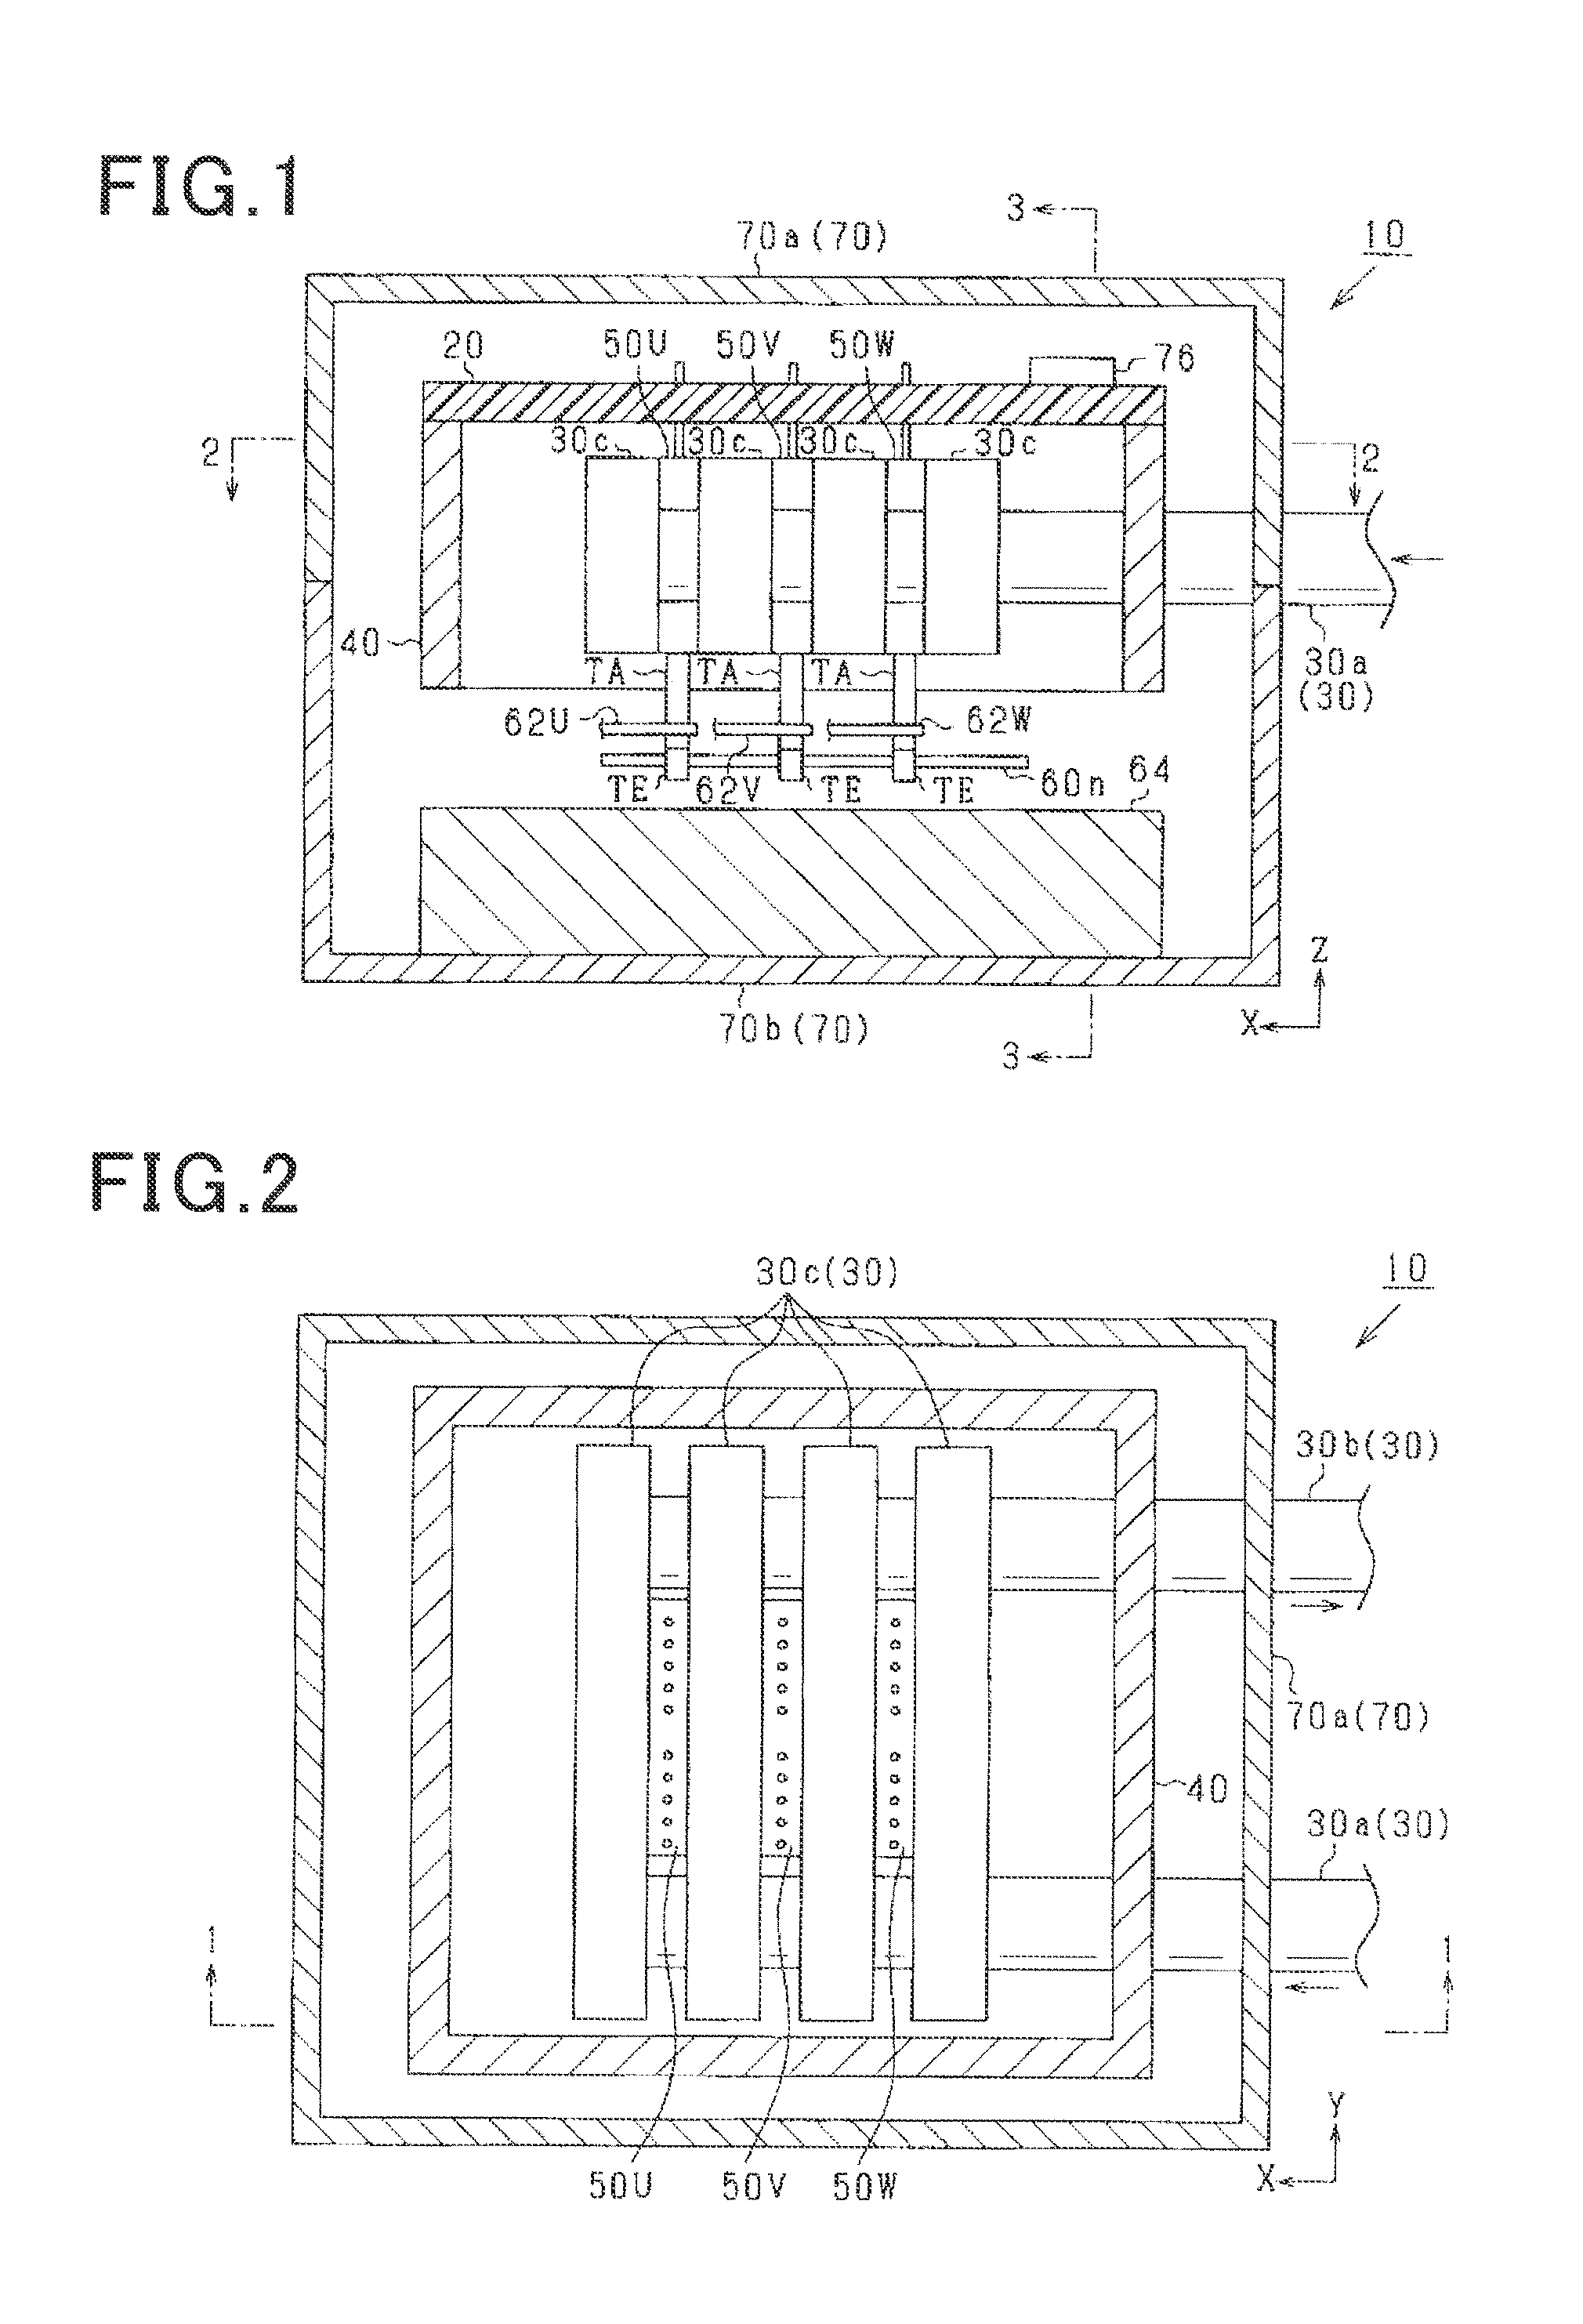 Power converter including smoothing capacitor and discharge resistor